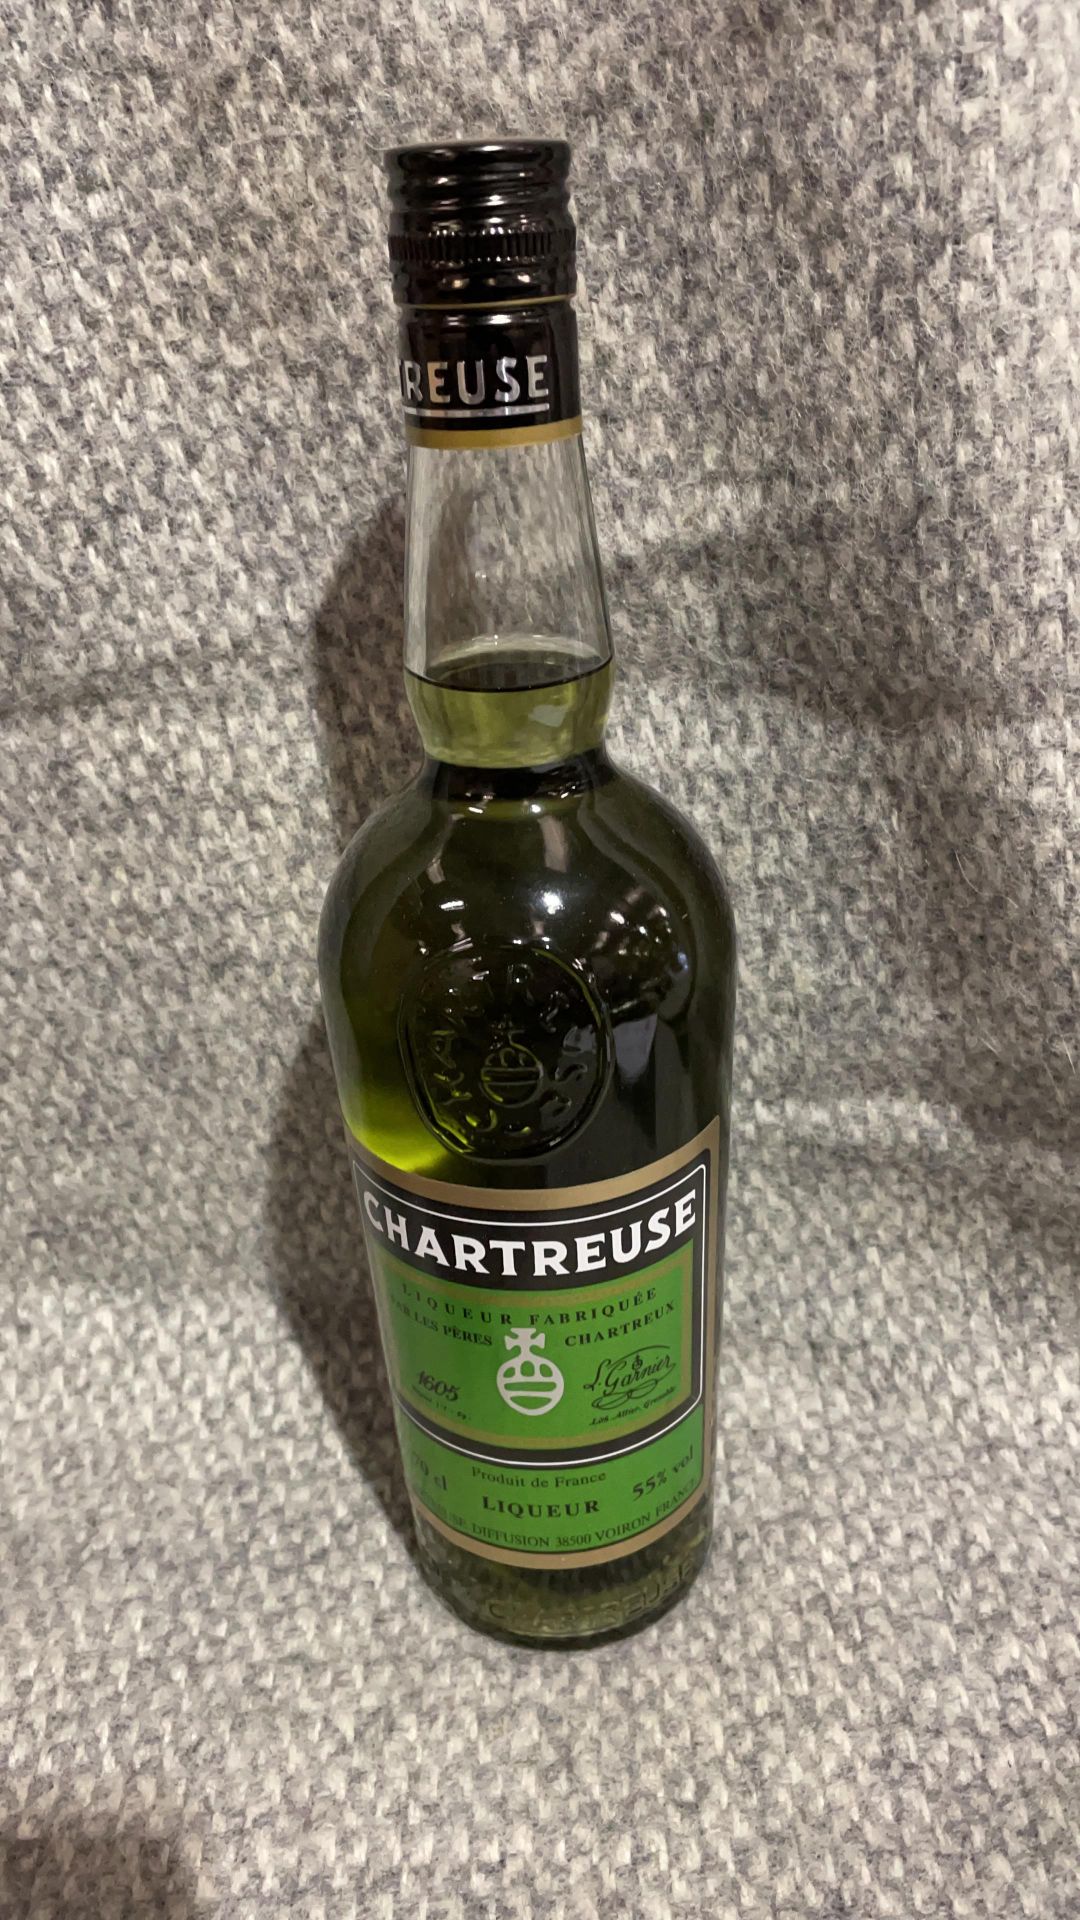 Chartreuse Verte Green Liqueur Isere, France 70cl ( Bid Is For 1x Bottle Option To Purchase